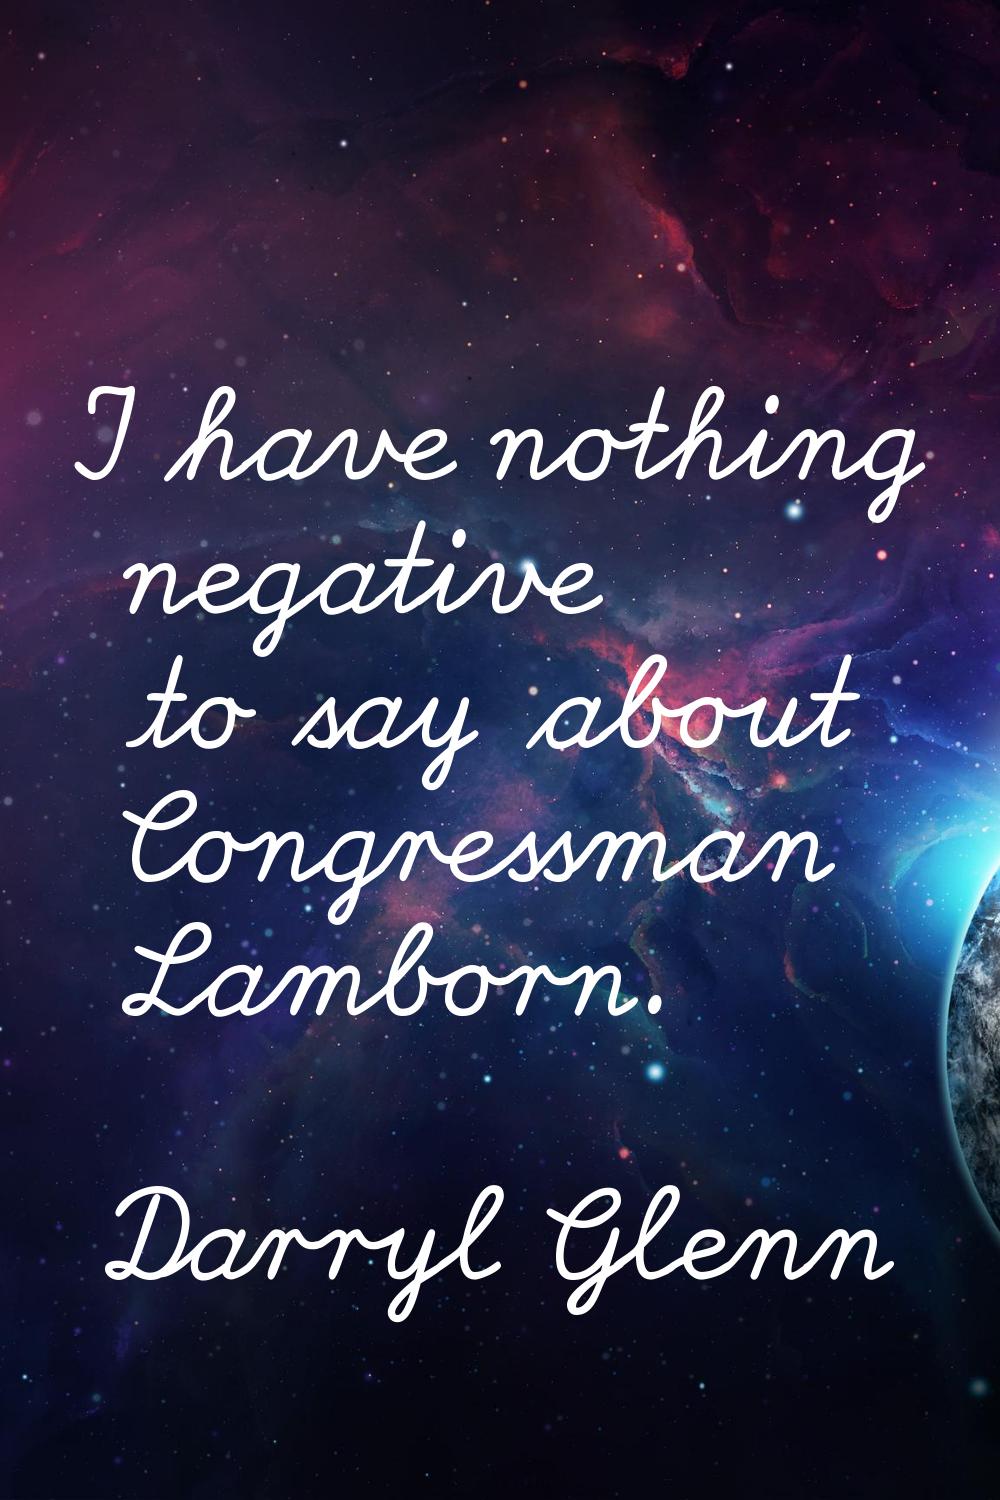 I have nothing negative to say about Congressman Lamborn.